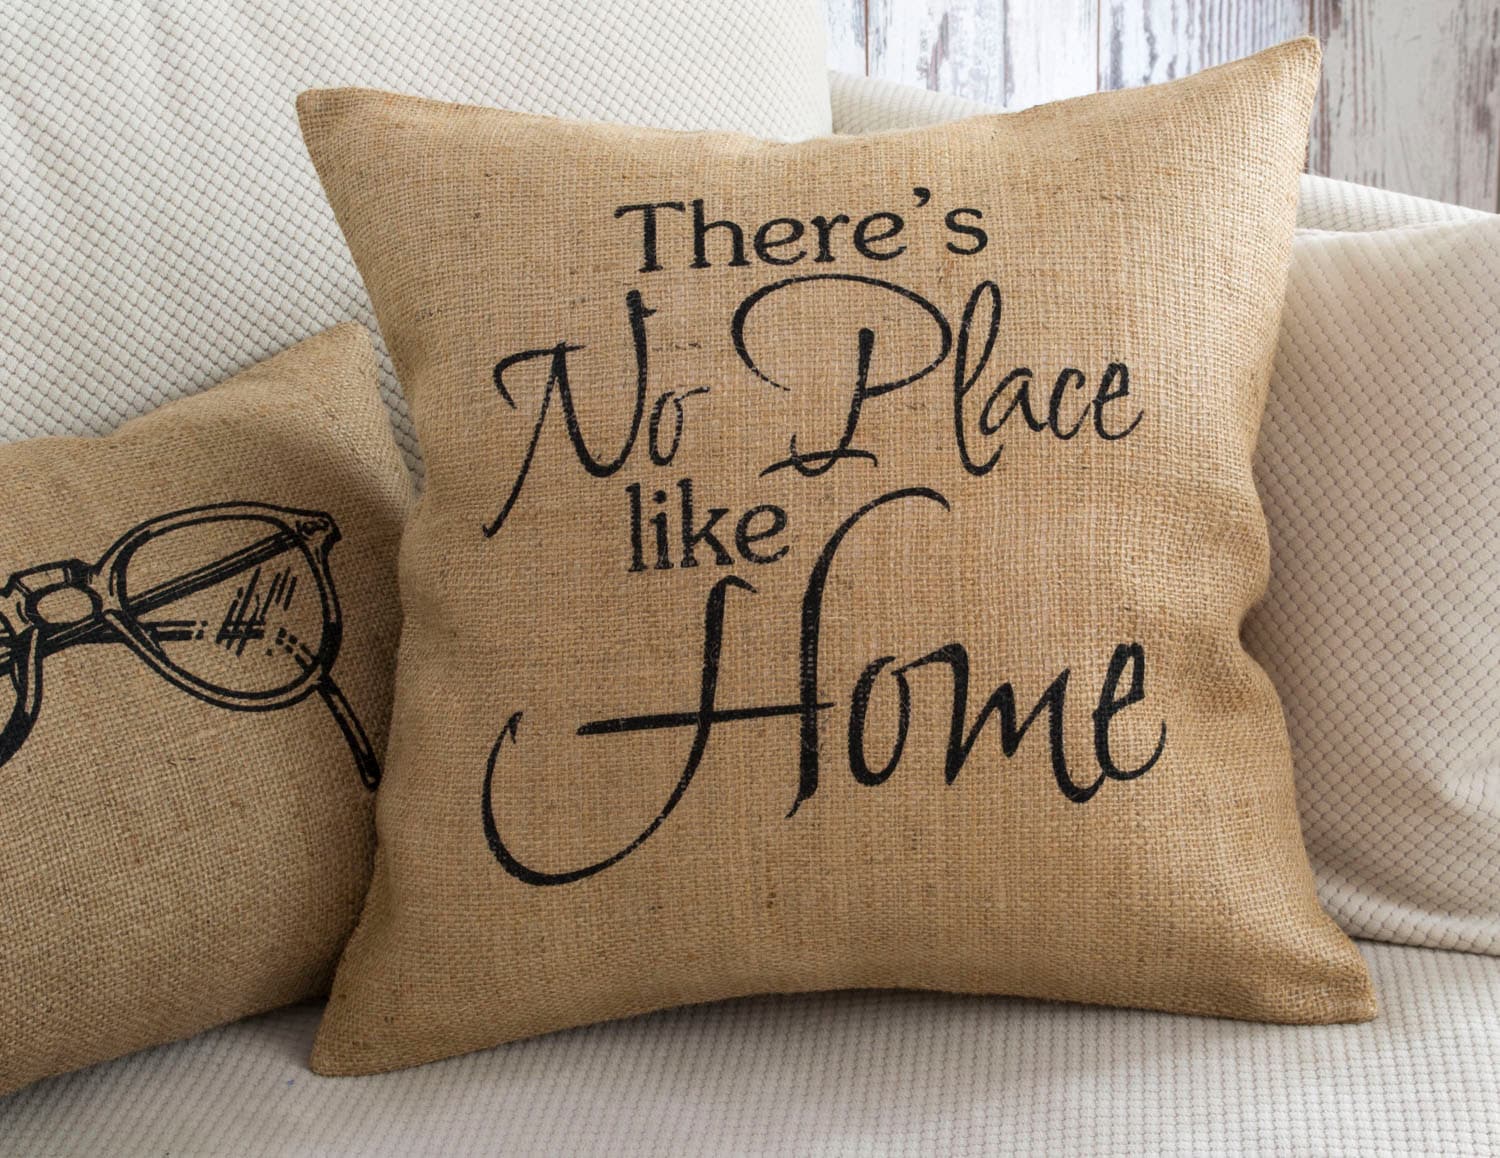 Decorative Pillows - a Perfect Touch To Interior Design: Pillows with text on them